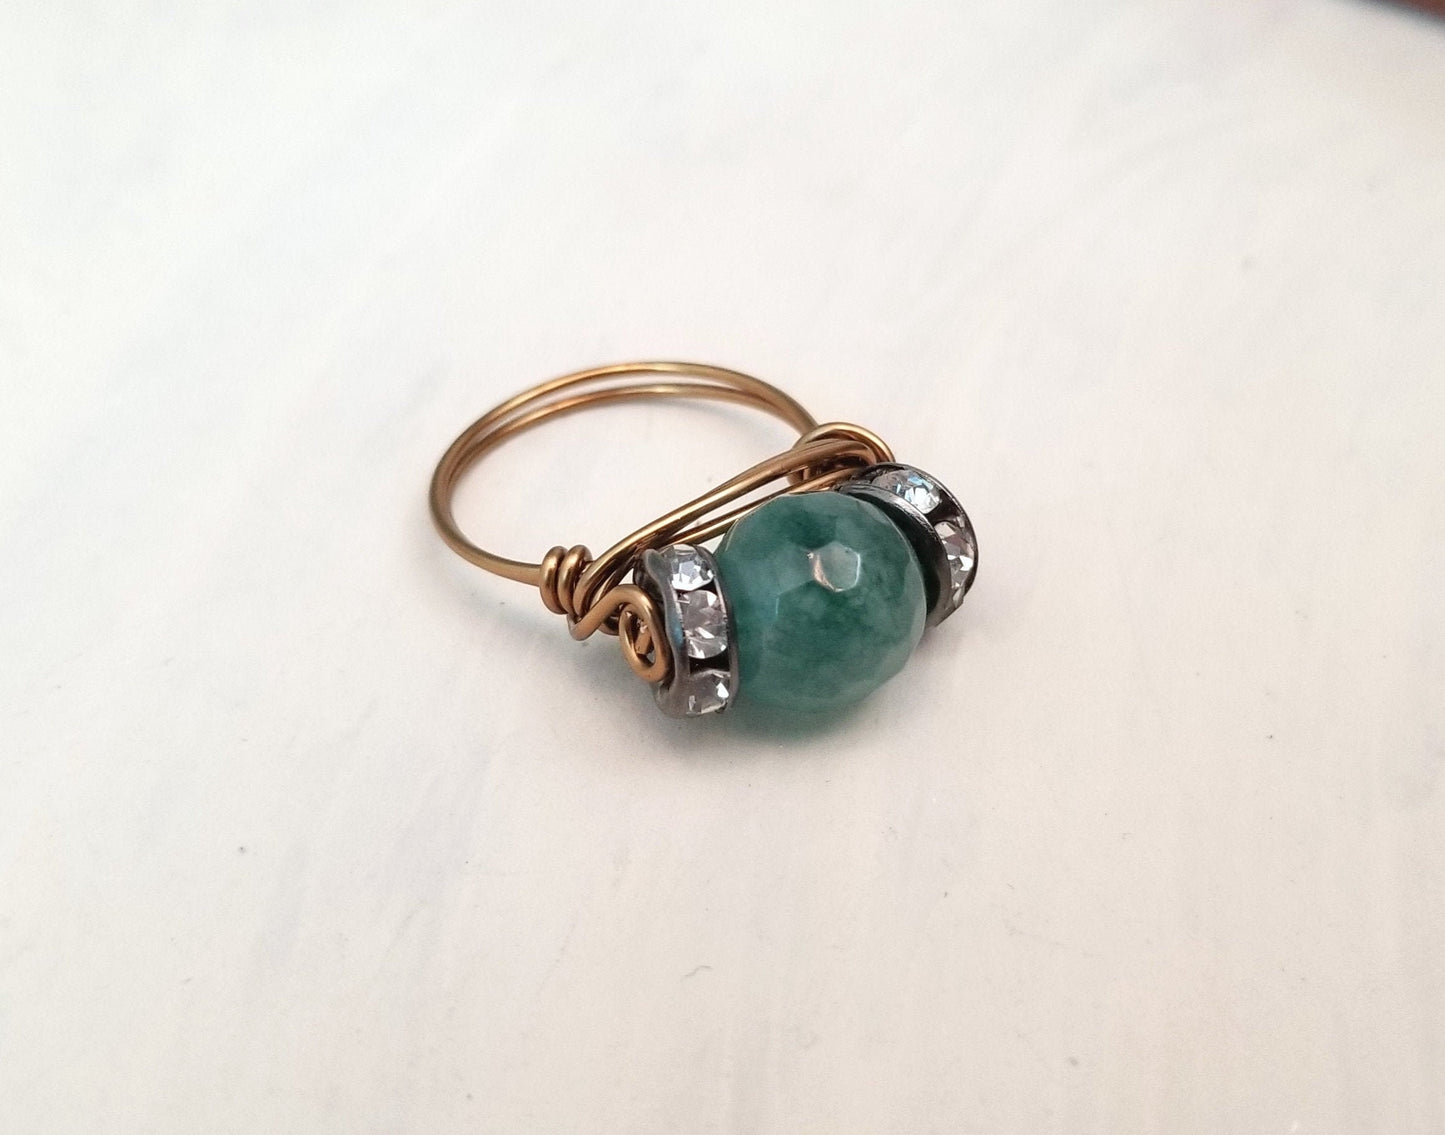 Wire Ring in Teal Blue-Green Agate with Rhinestones, Fairy Tale, Renaissance, Medieval, Choice of Colors and Metals